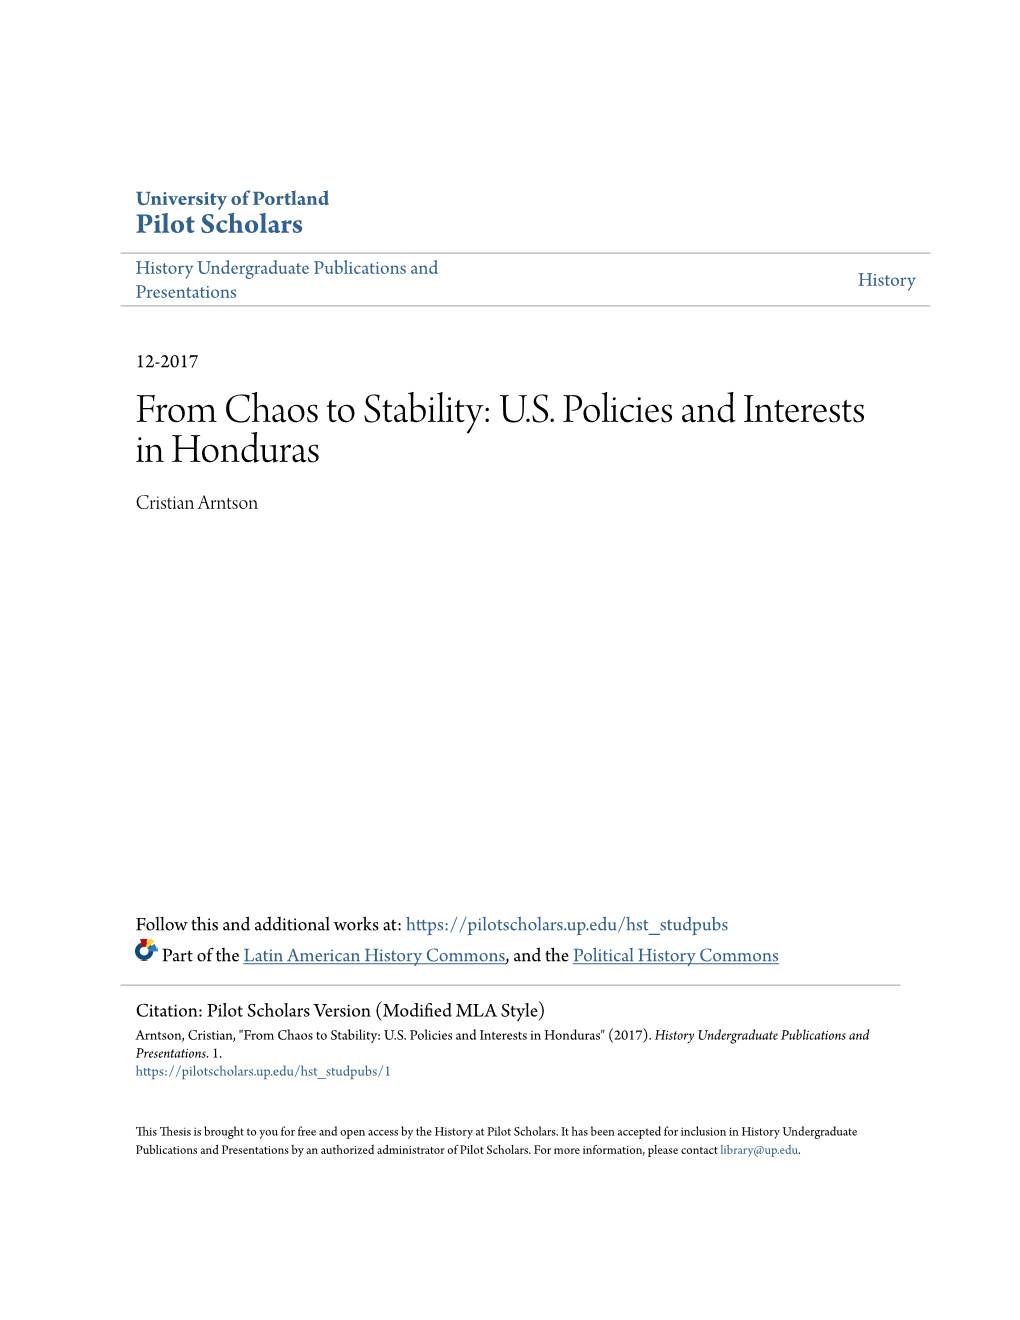 From Chaos to Stability: U.S. Policies and Interests in Honduras Cristian Arntson